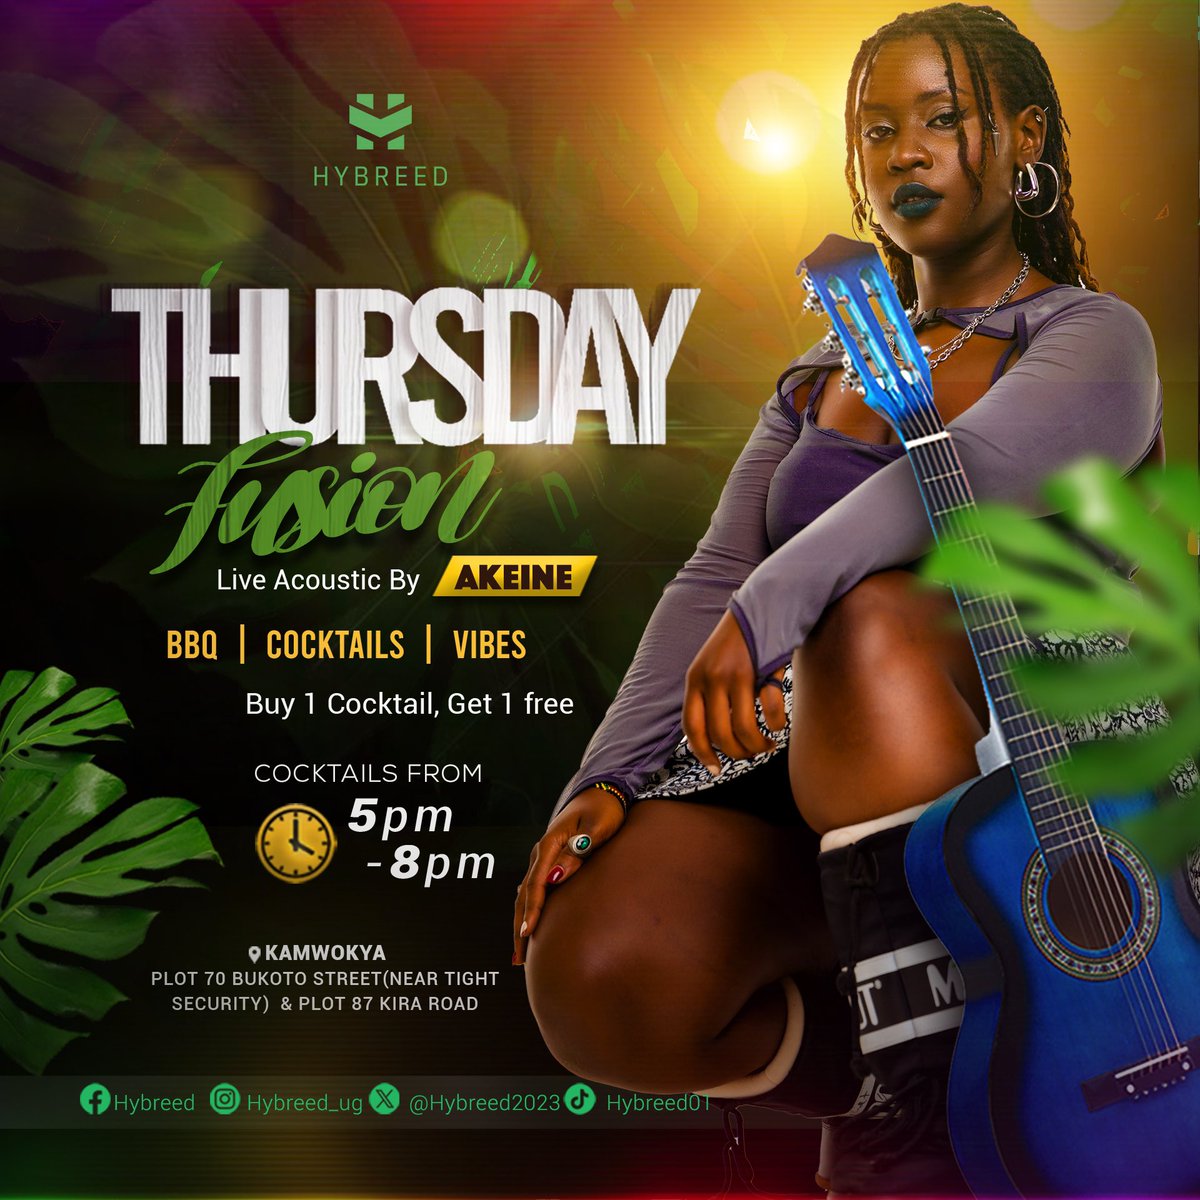 I’ll be singing at @Hybreed2023 this Thursday💃🏾 Come through!